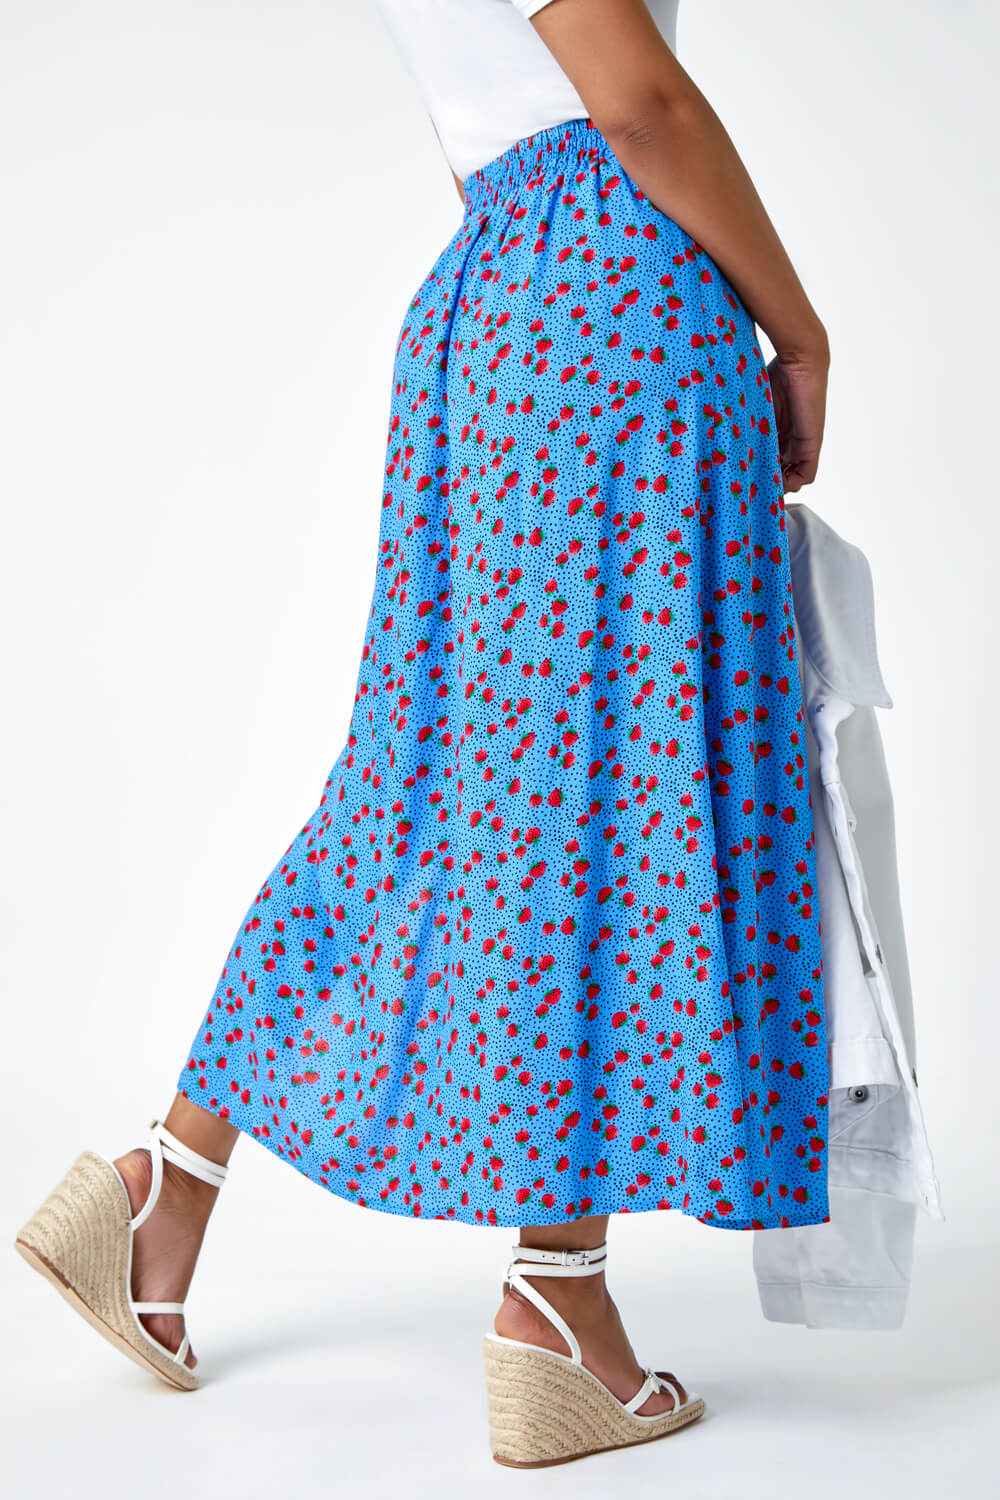 Blue Petite Strawberry Button Stretch Skirt, Image 3 of 5